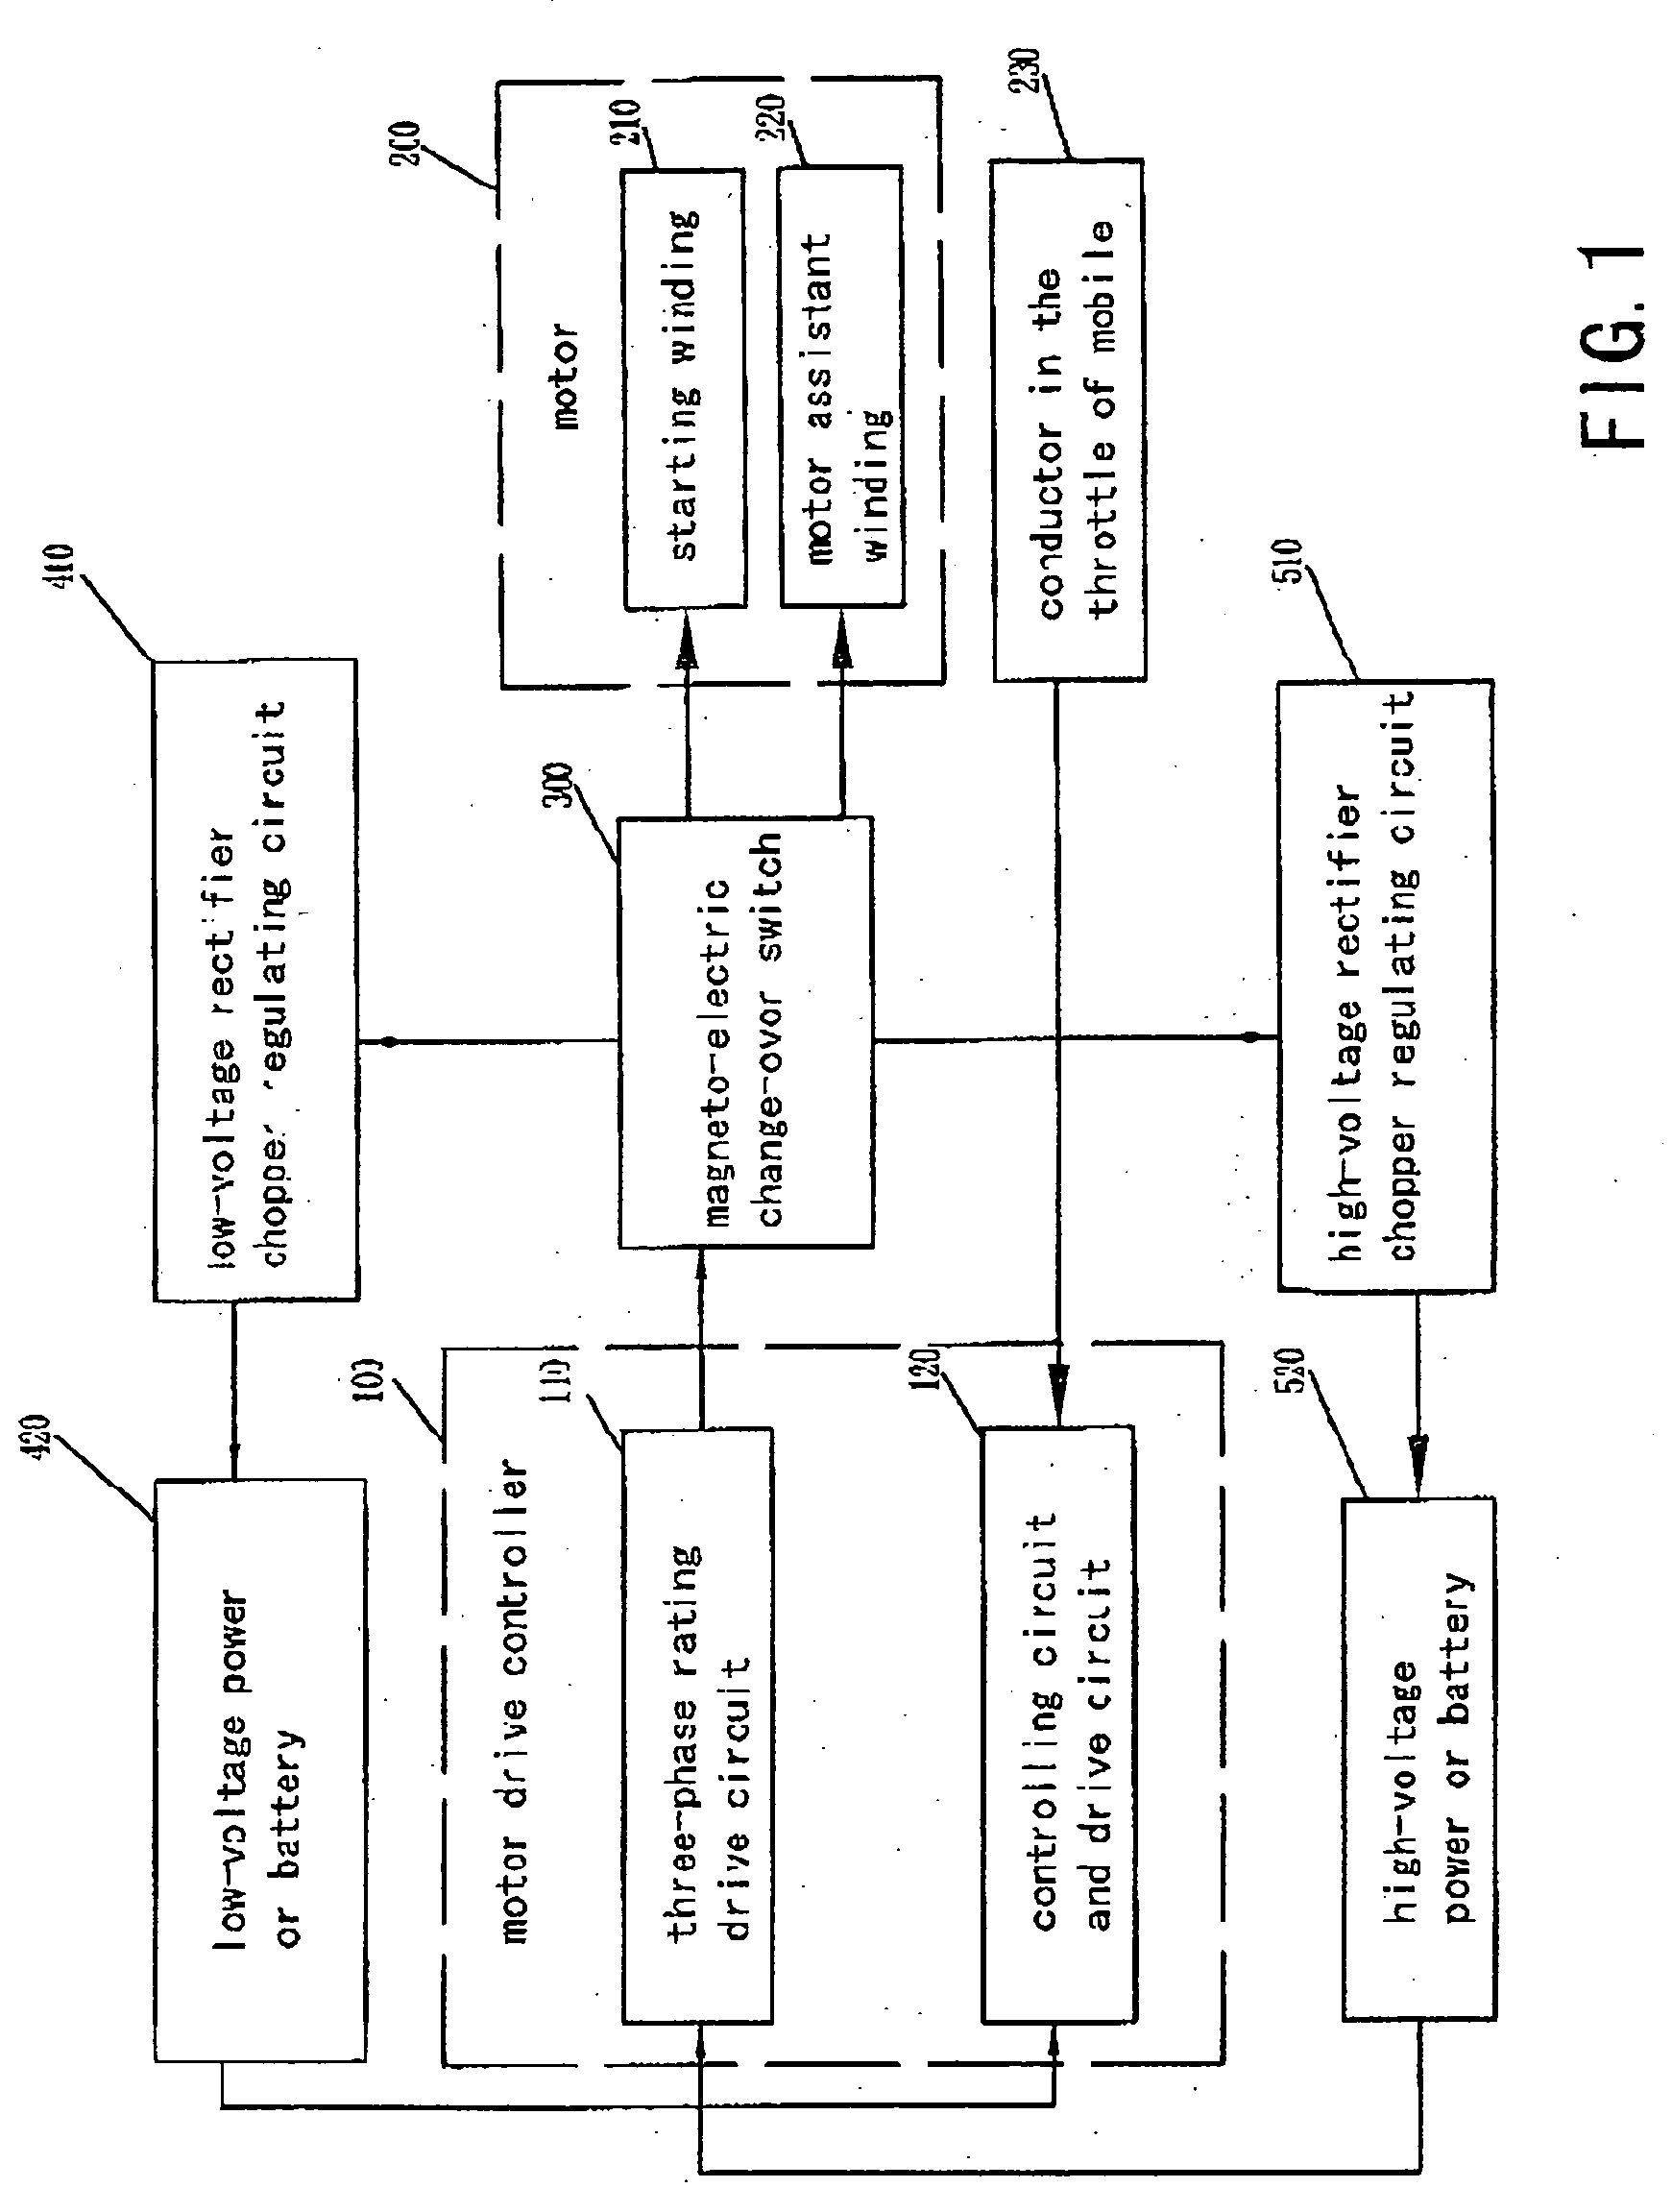 Starting and Generating Multiplying Cotnrol System,and Method for Using the System, and an Electromotion Mixed Dynamic Vehicle